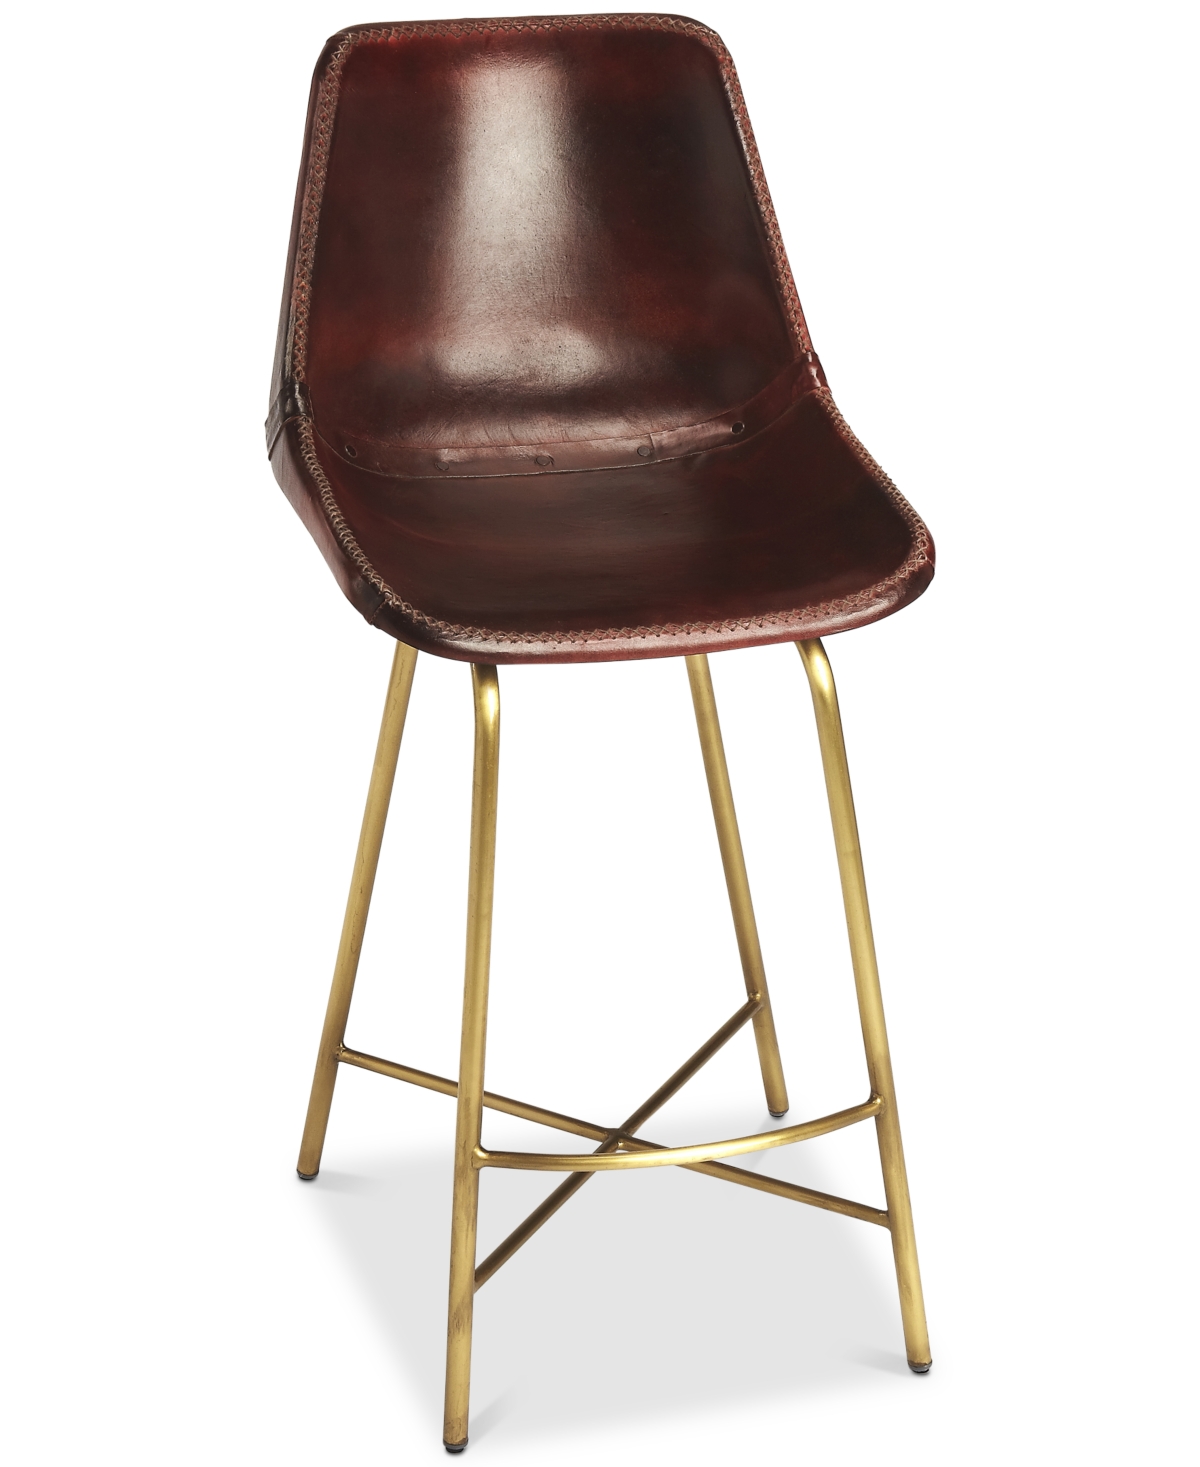 6106392 Butler Specialty Commercial Leather Bar Stool sku 6106392